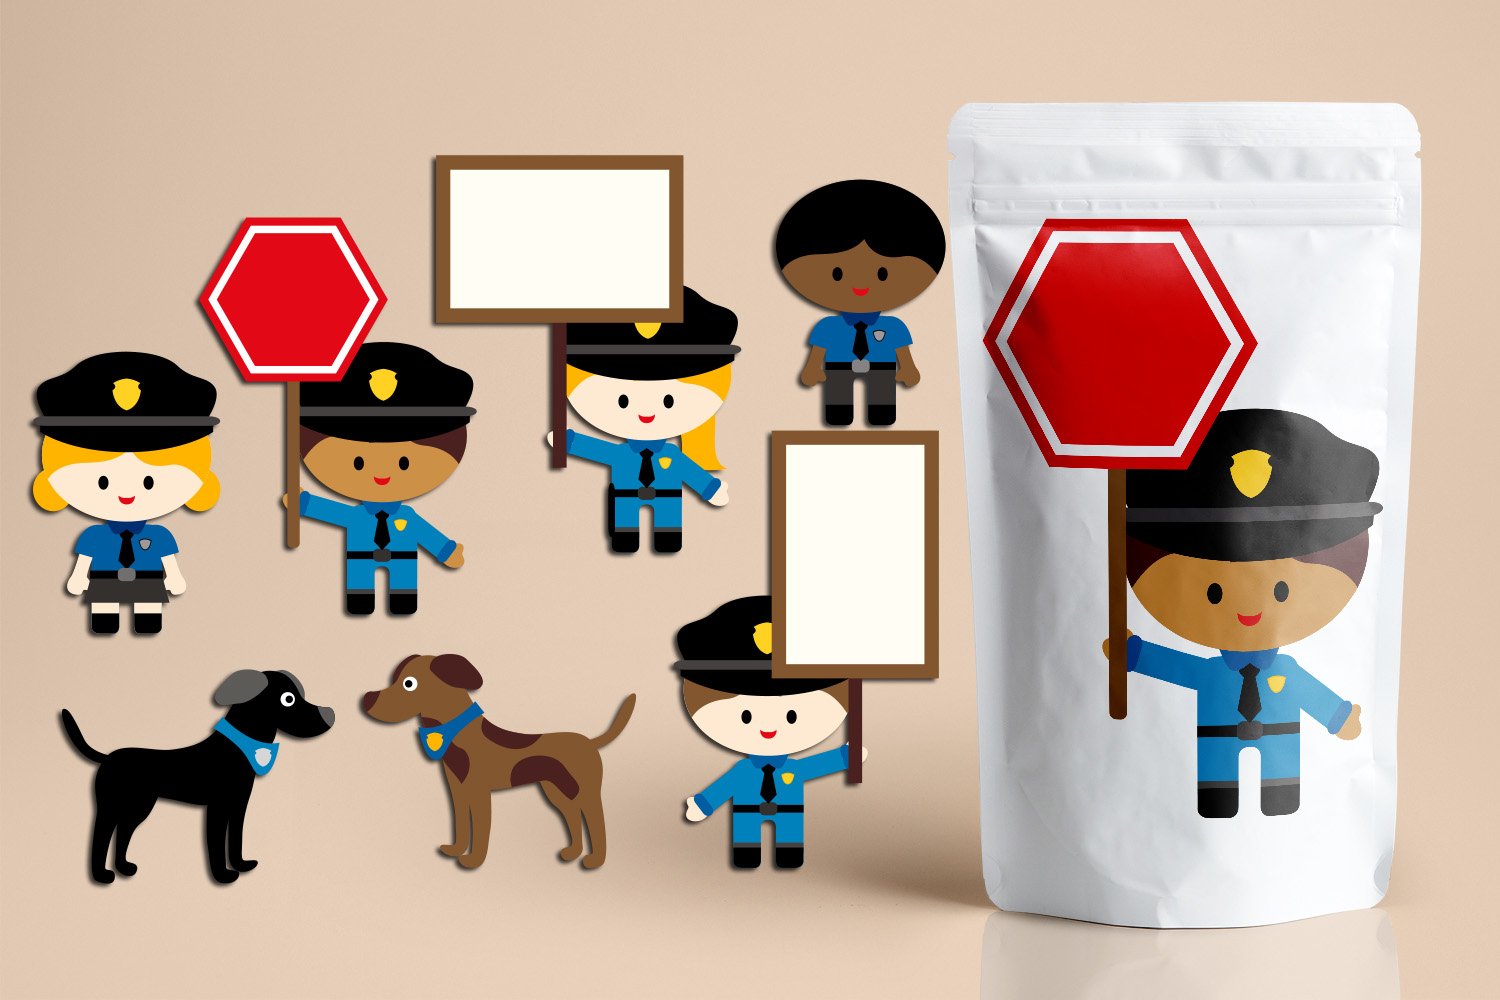 A policeman with a red road sign, a policeman and a policewoman with a white roadsign, a policeman and a policewoman, a brown and black dog, a white zip bag for coffee with a picture of a policeman with a red road sign.